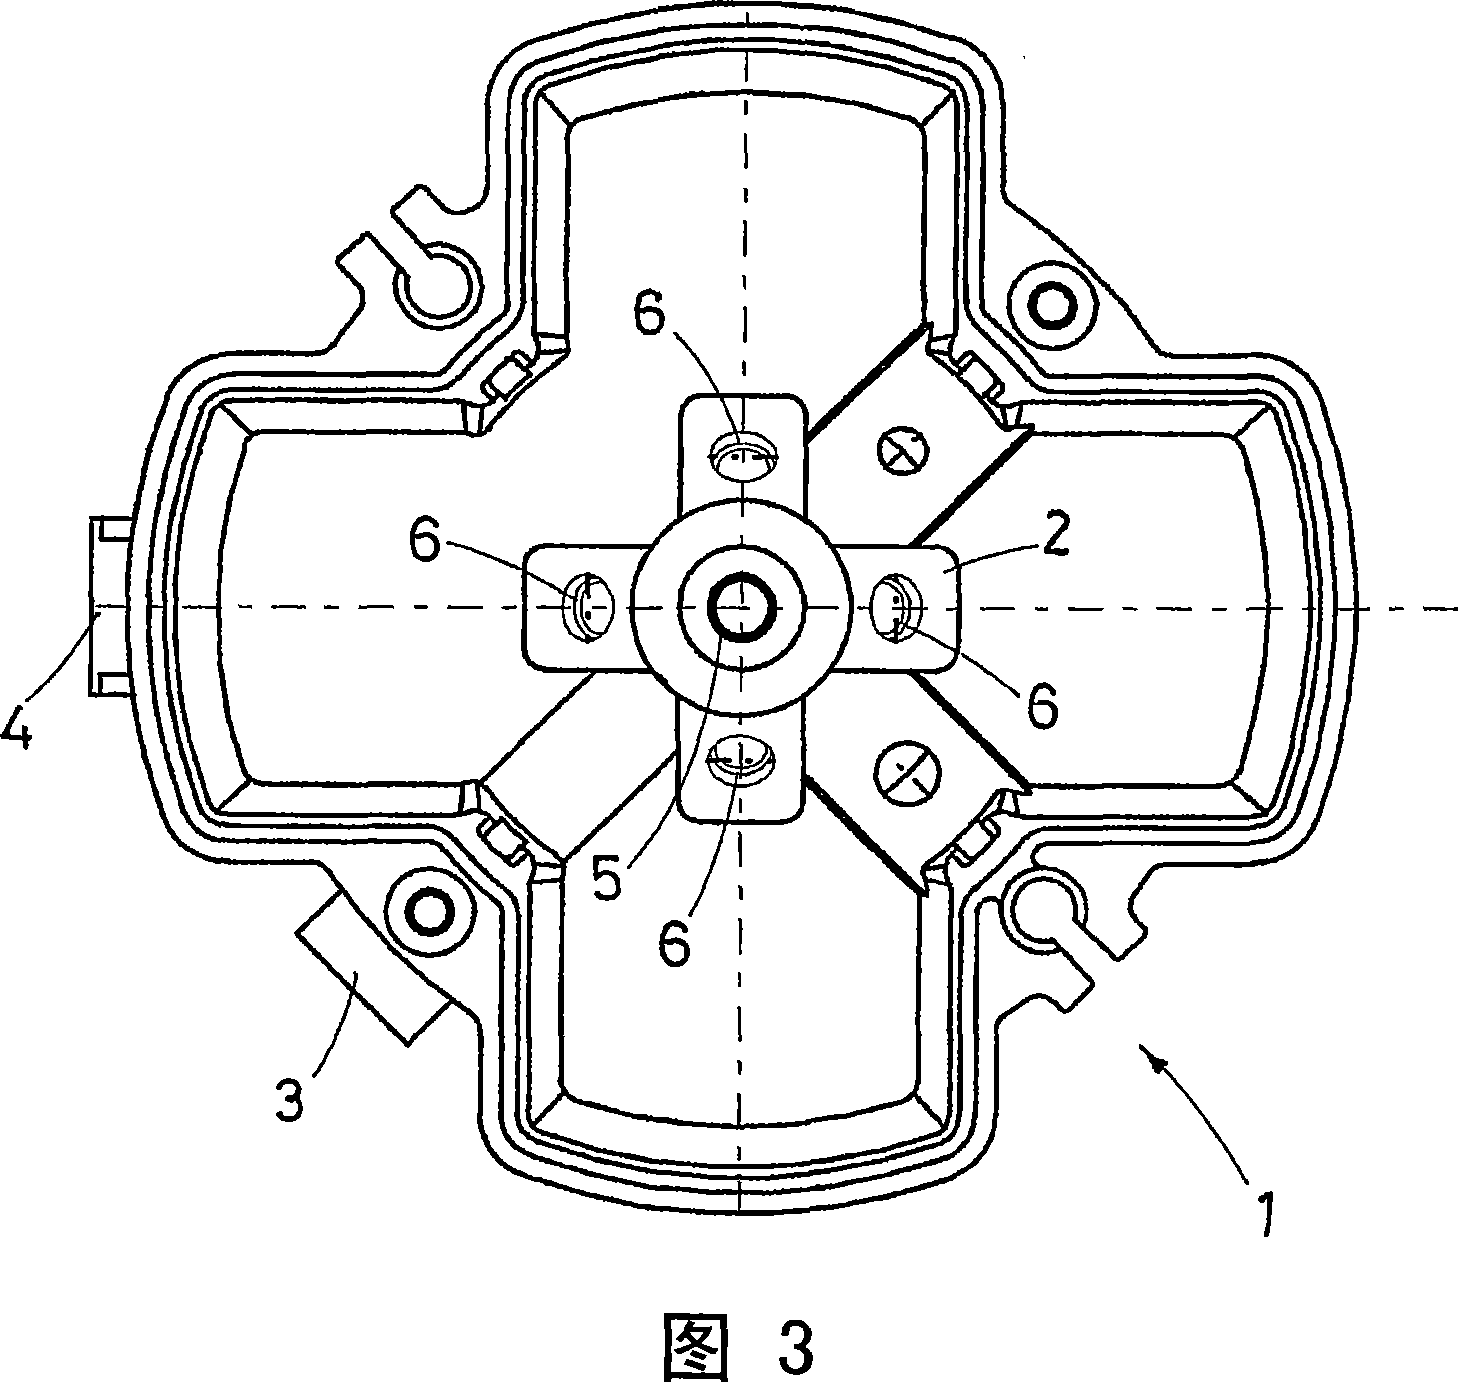 High-power double burner for gas cookers, with multiple concentric flame crowns